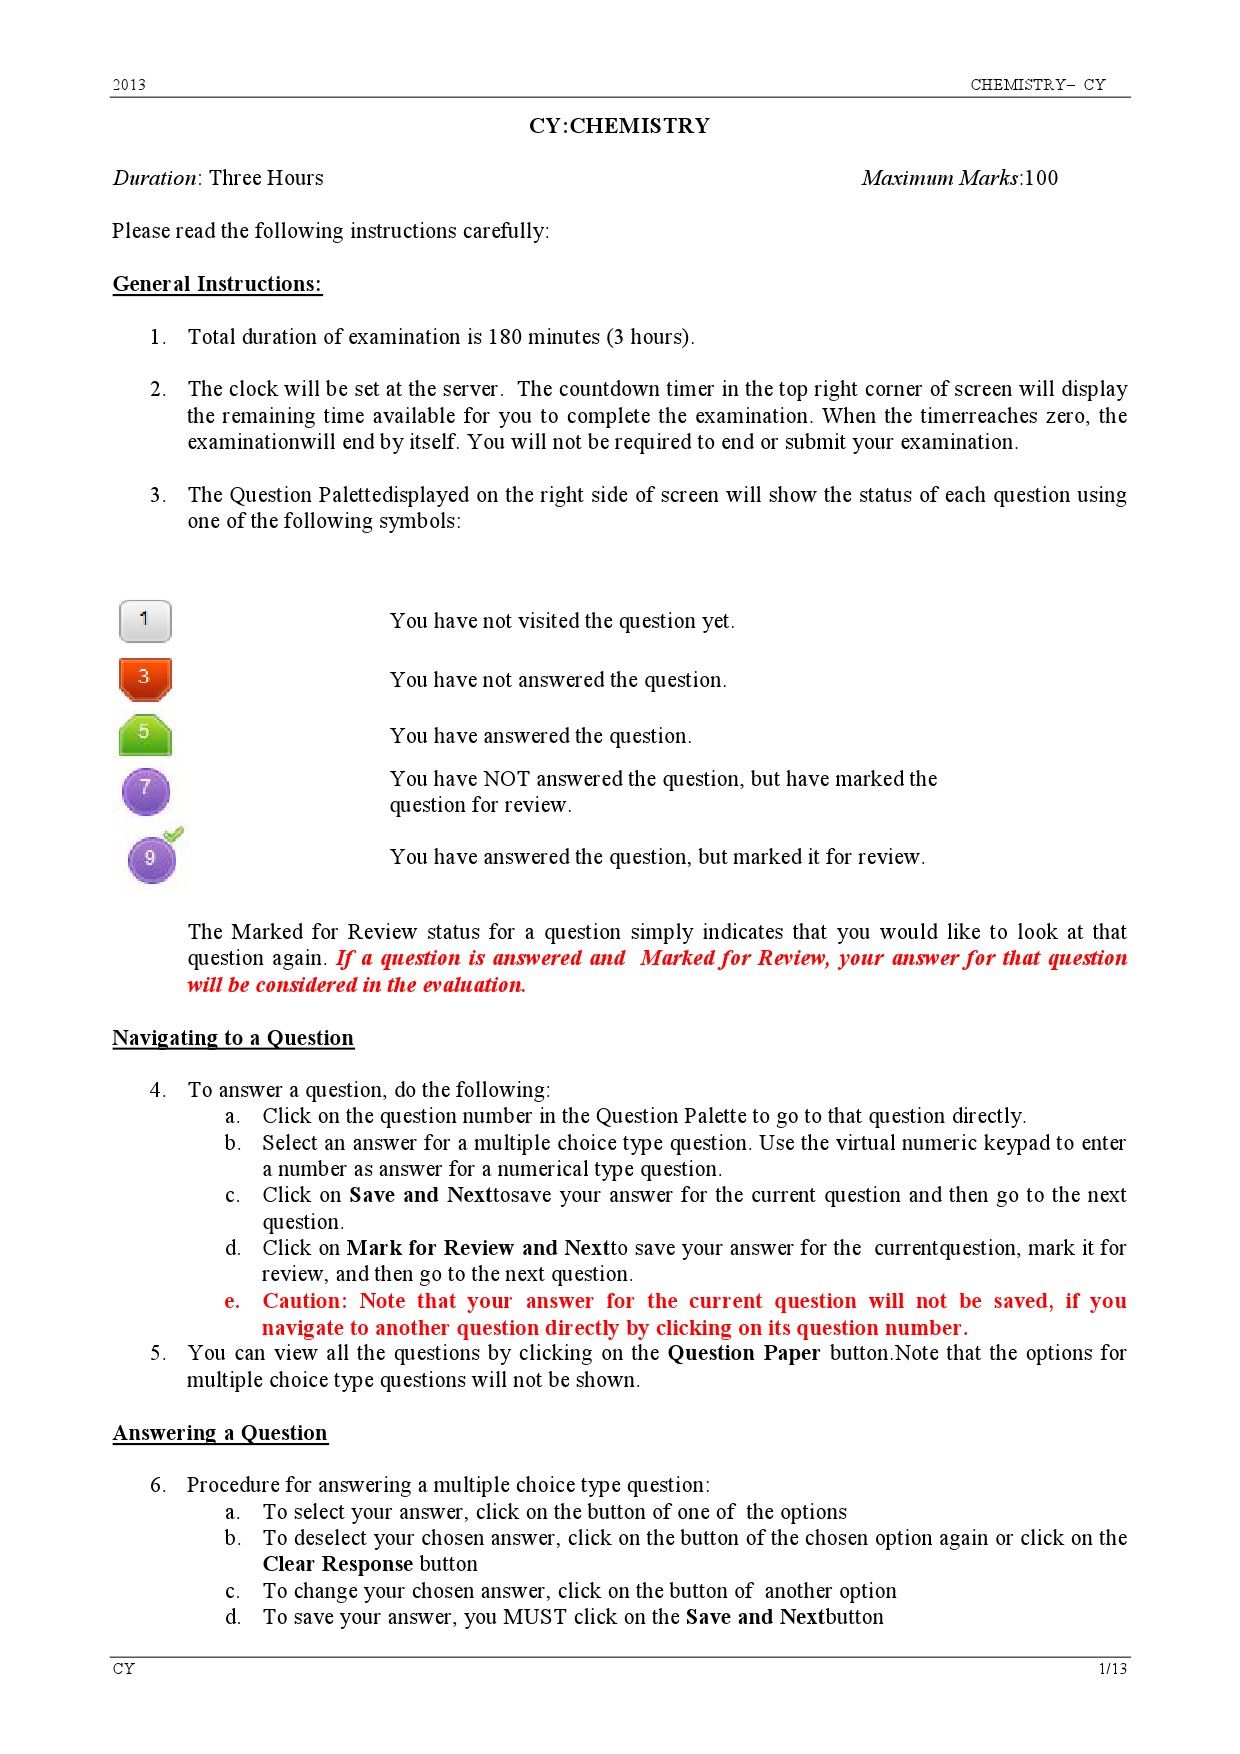 GATE Exam Question Paper 2013 Chemistry 1